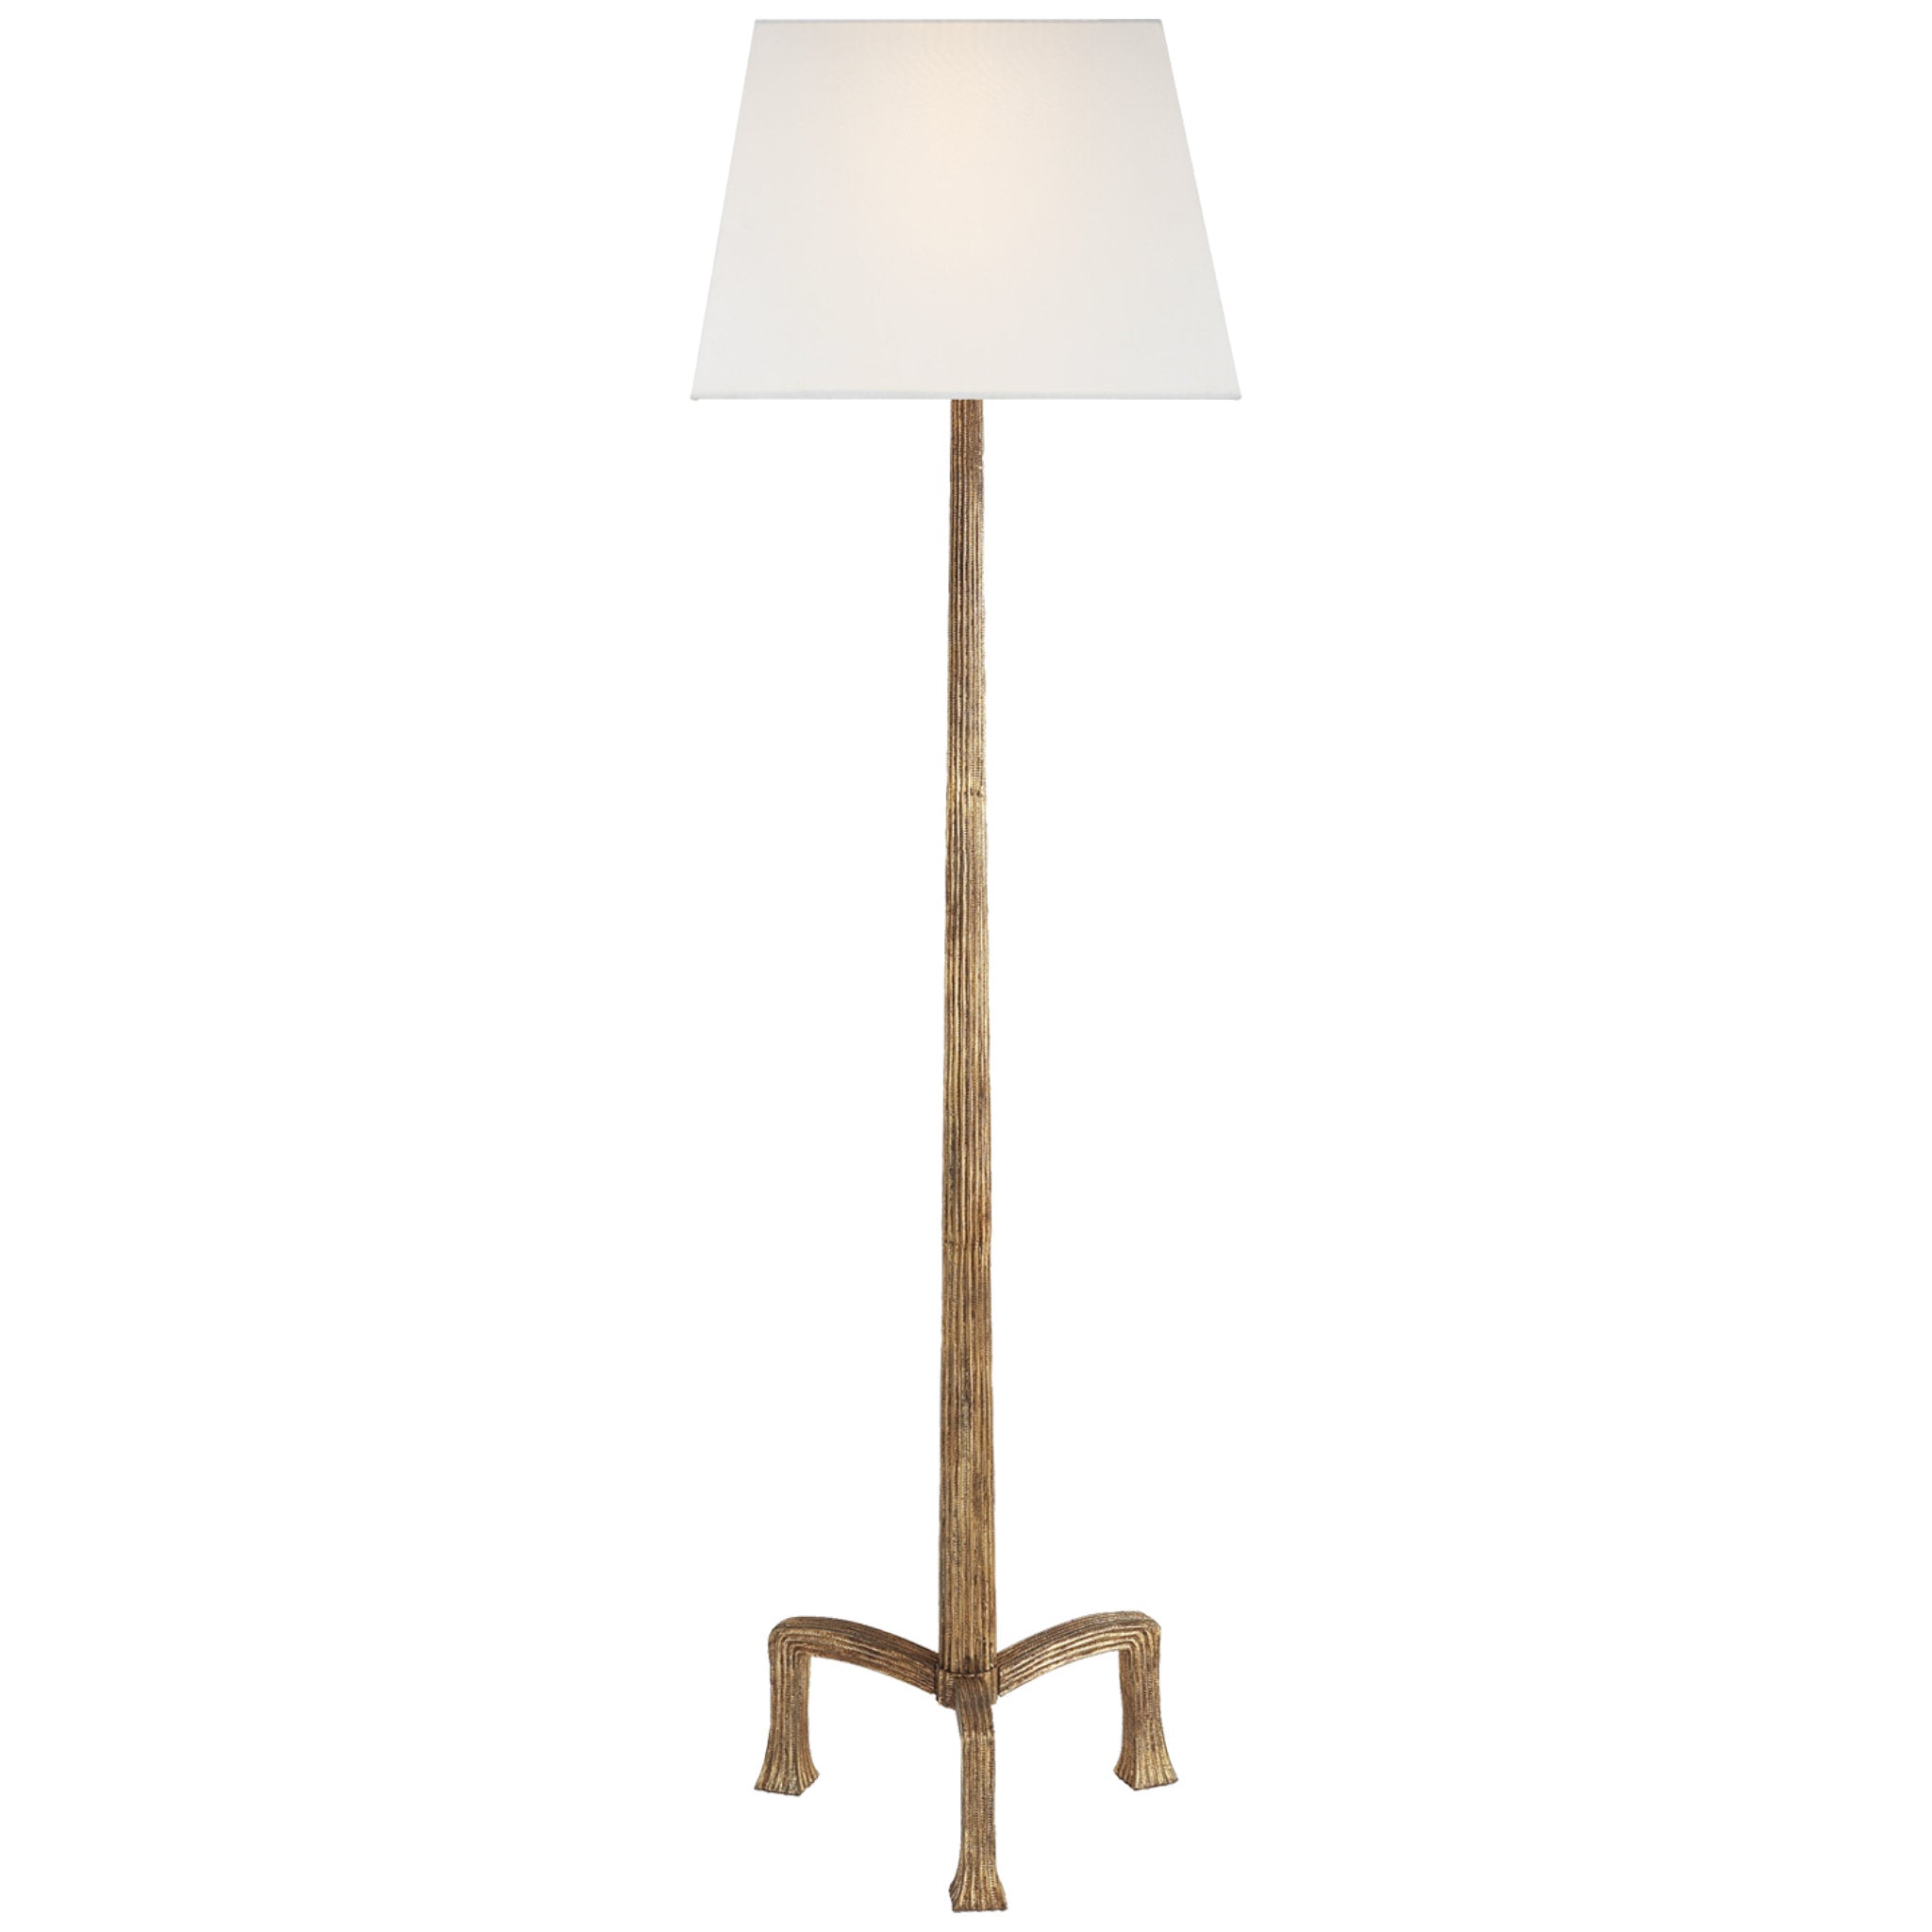 Chapman & Myers Strie Floor Lamp in Gilded Iron with Linen Shade